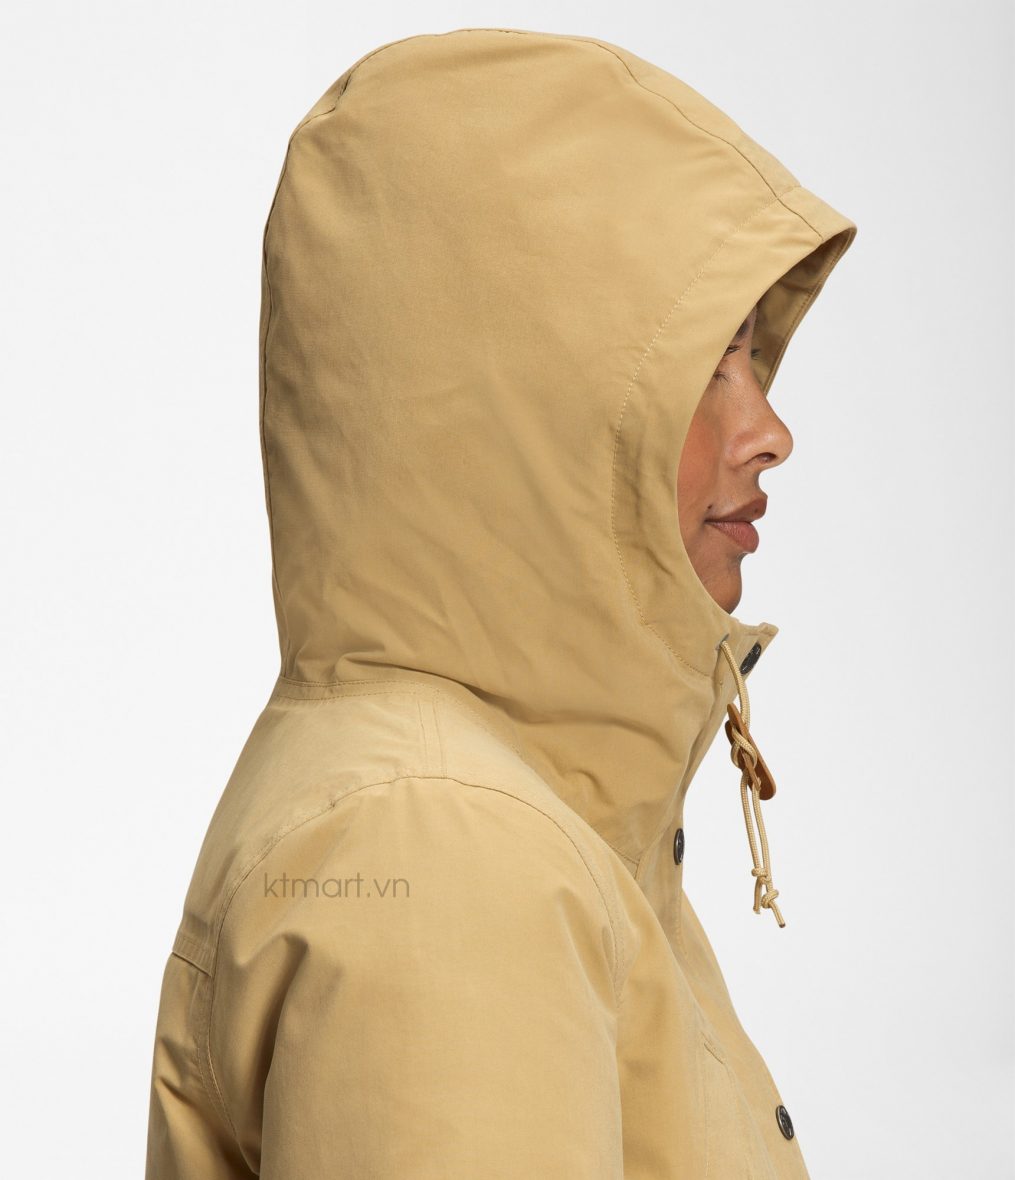 The North Face Women’s Snow Down Parka NF0A5AA4 Antelope Tan ktmart 8